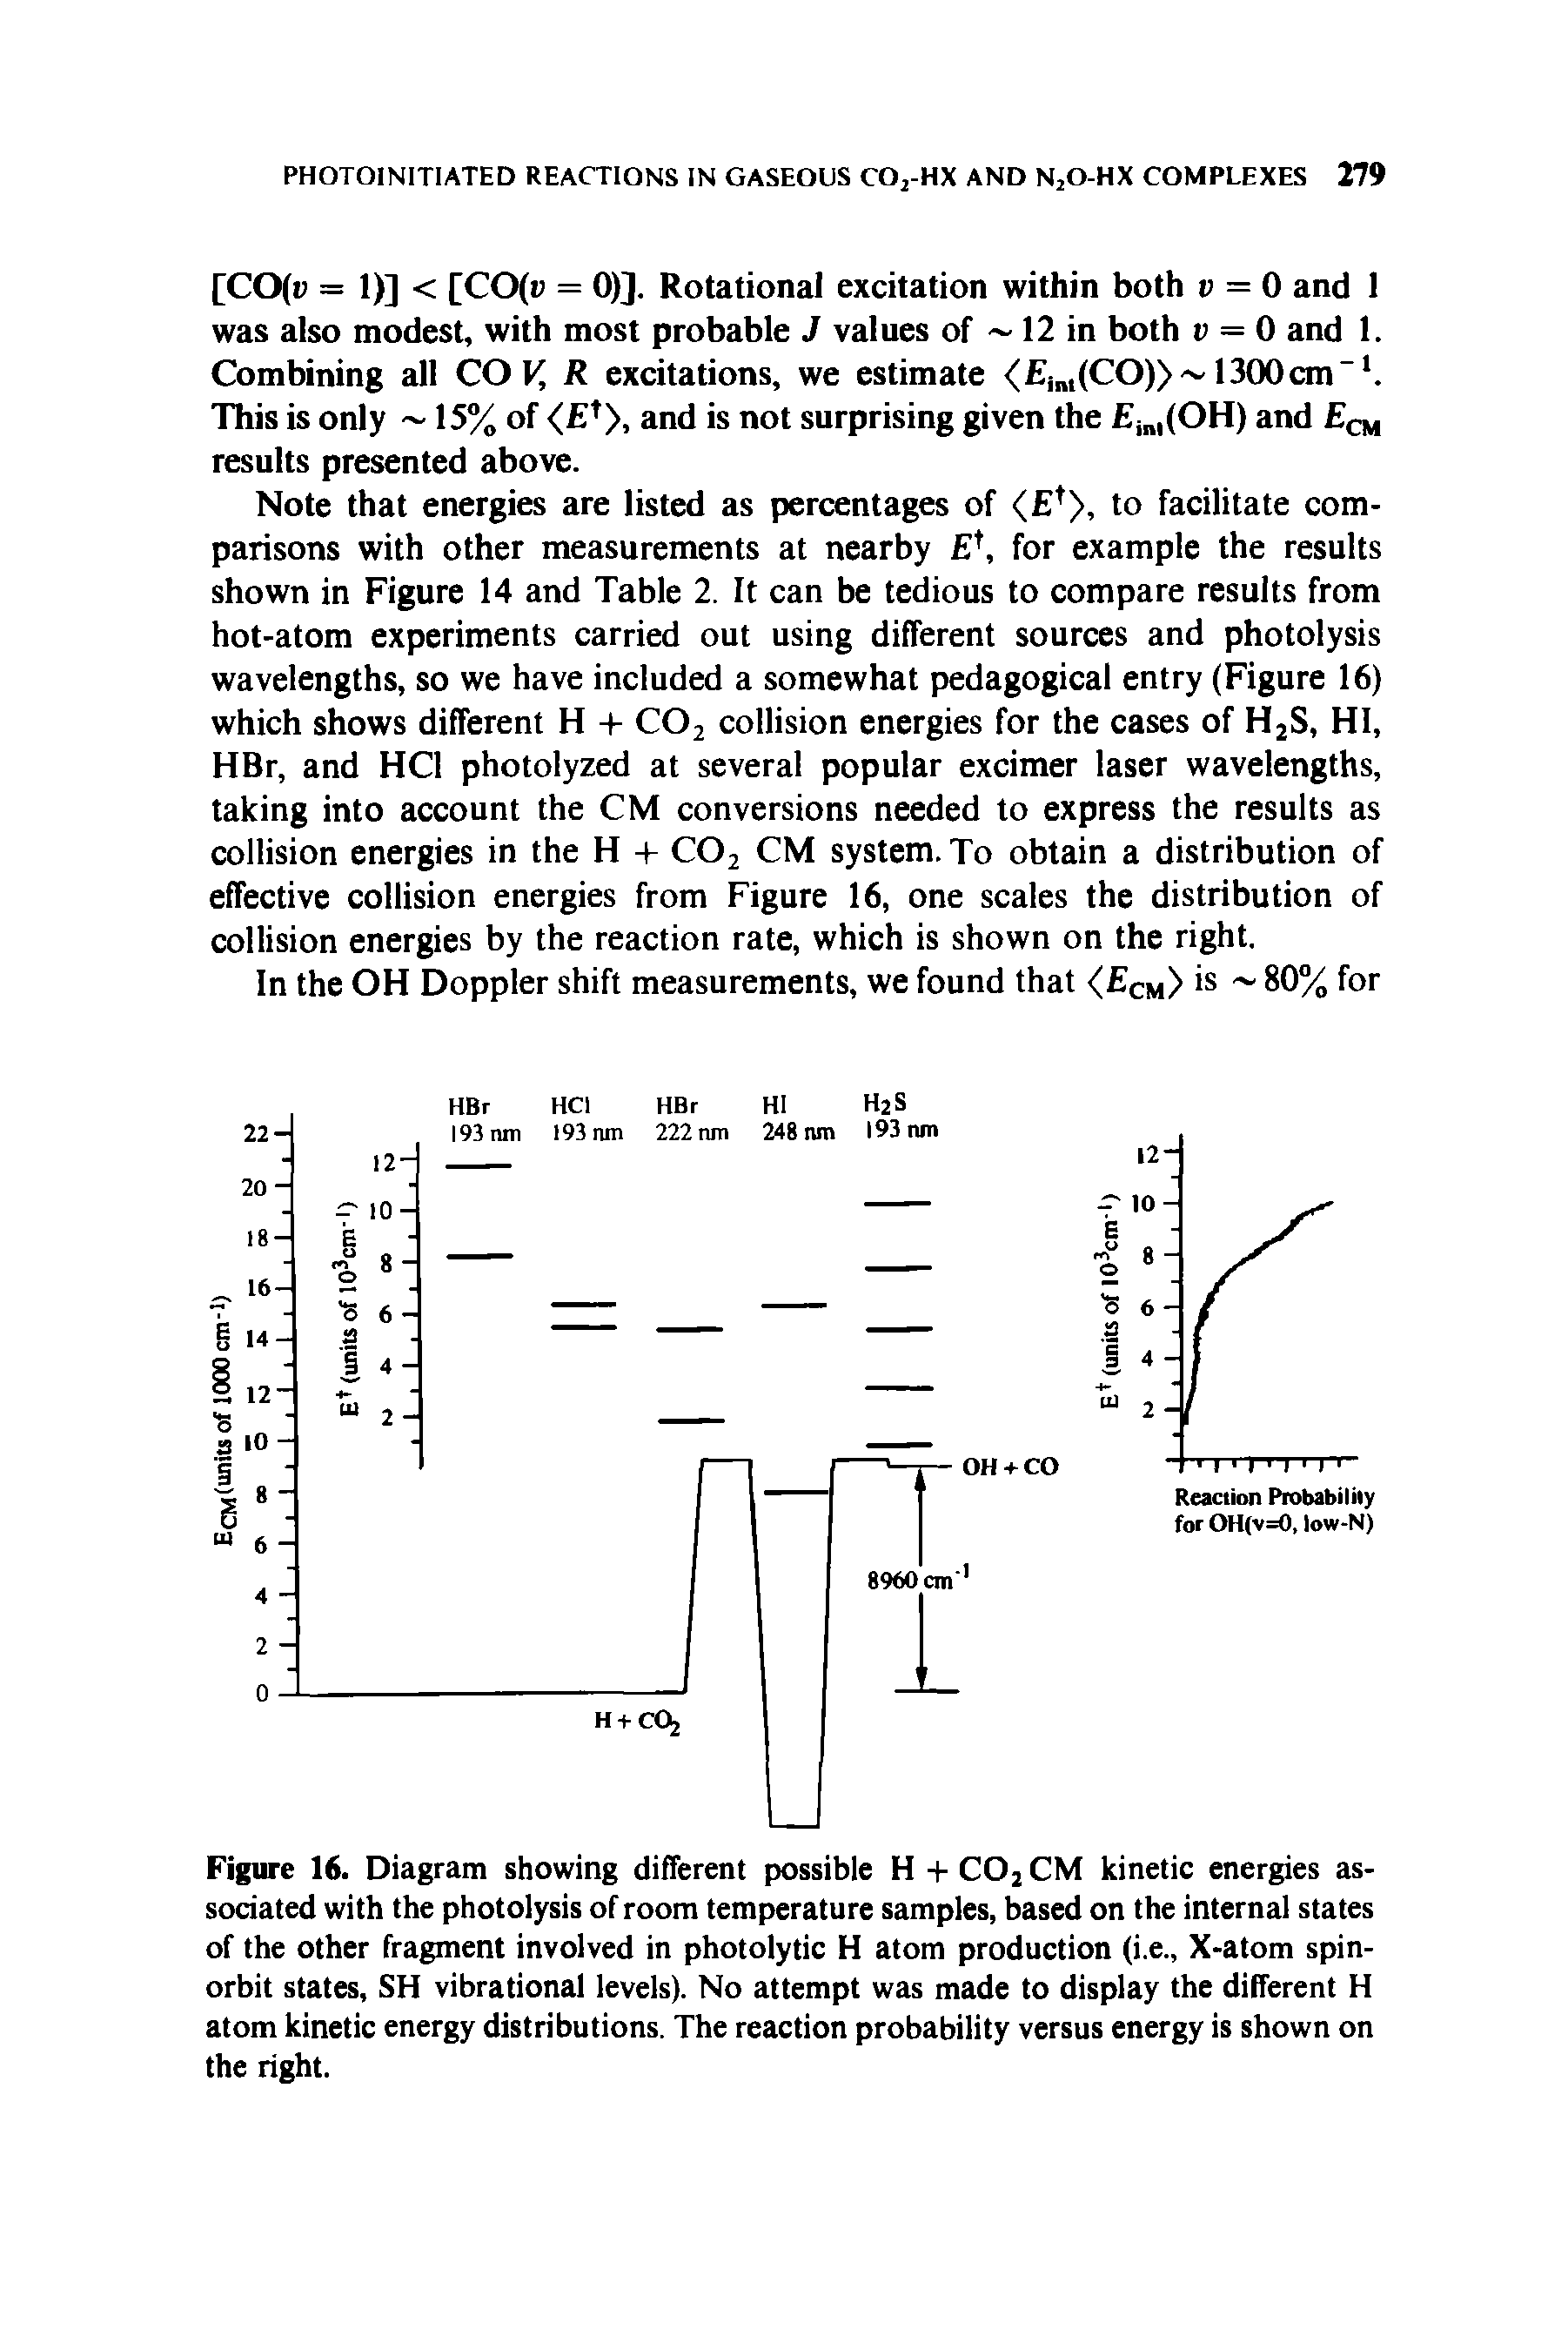 Figure 16. Diagram showing different possible H - - CO2 CM kinetic energies associated with the photolysis of room temperature samples, based on the internal states of the other fragment involved in photolytic H atom production (i.e., X-atom spin-orbit states, SH vibrational levels). No attempt was made to display the different H atom kinetic energy distributions. The reaction probability versus energy is shown on the right.